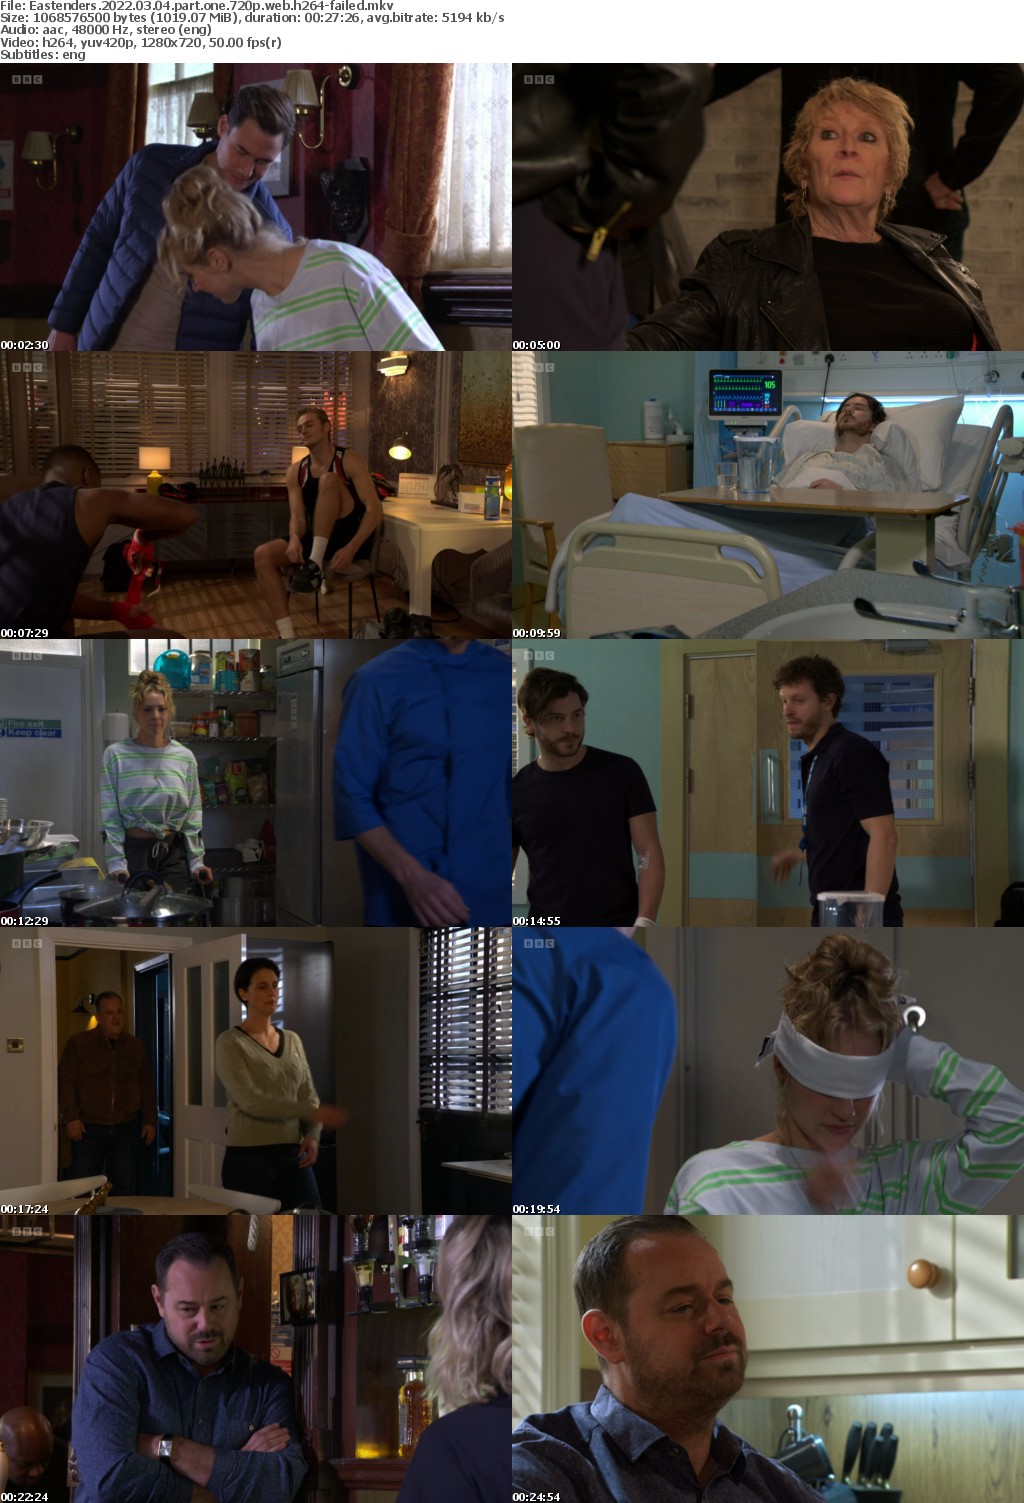 Eastenders 2022 03 04 Part One 720p WEB h264-FaiLED